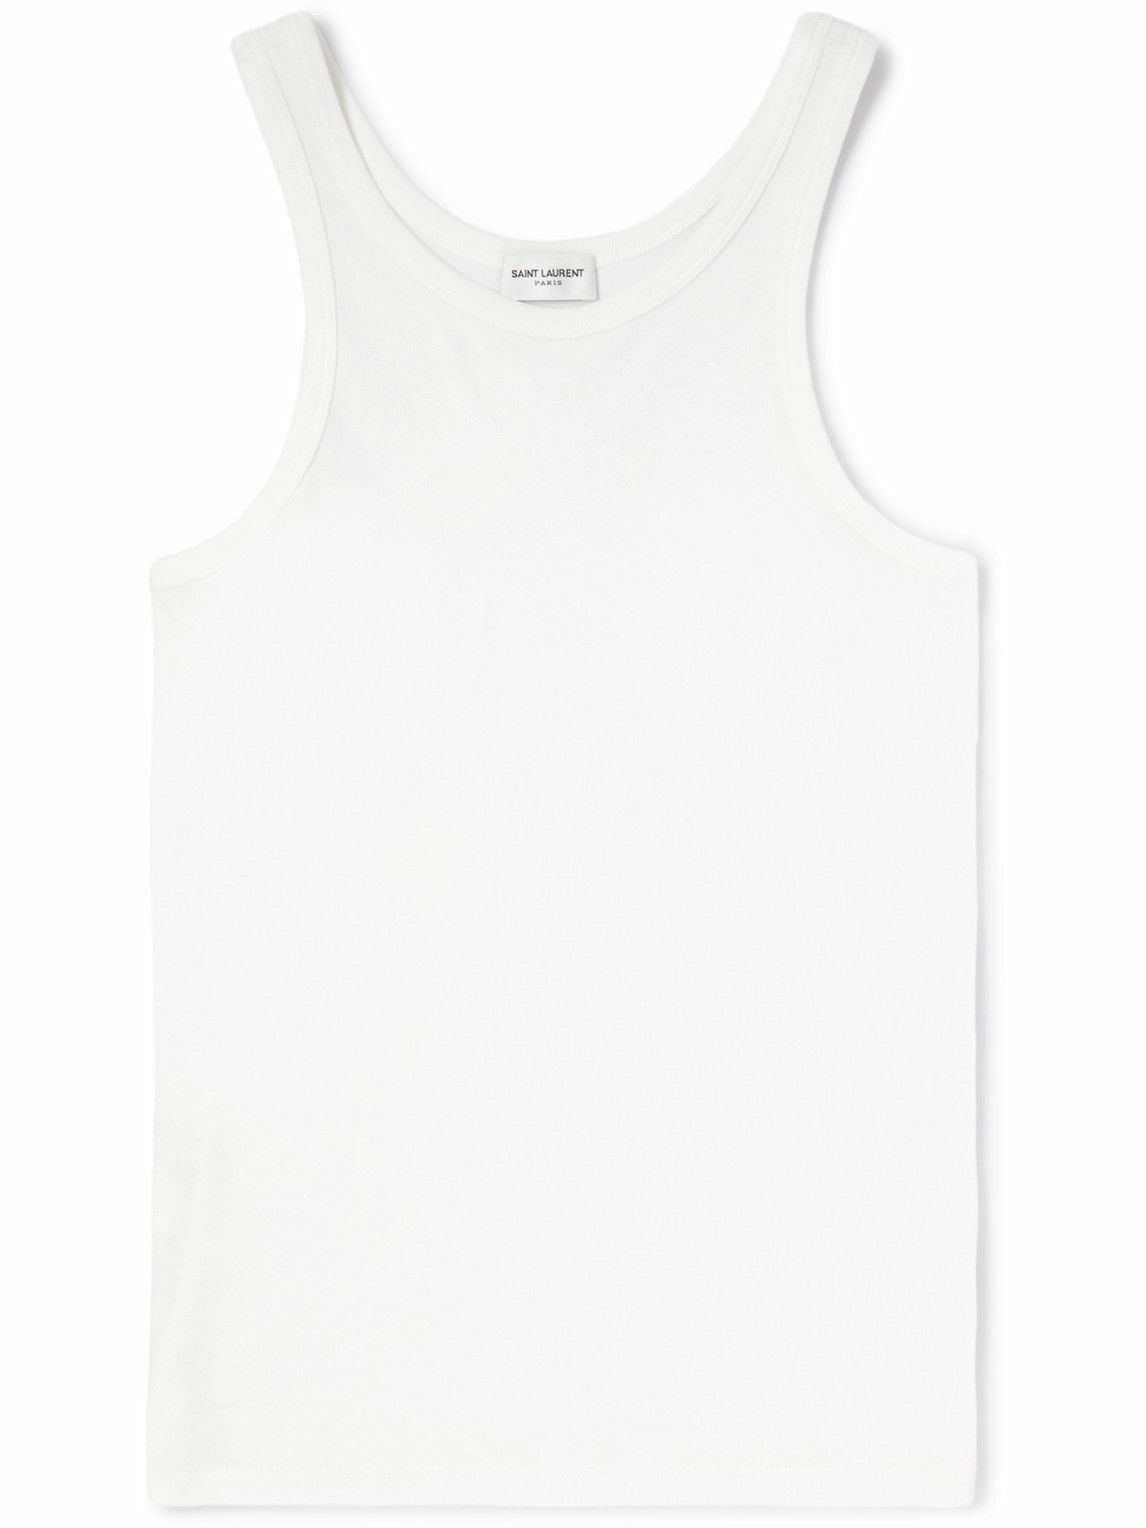 Photo: SAINT LAURENT - Logo-Embroidered Cotton-Jersey Tank Top - White